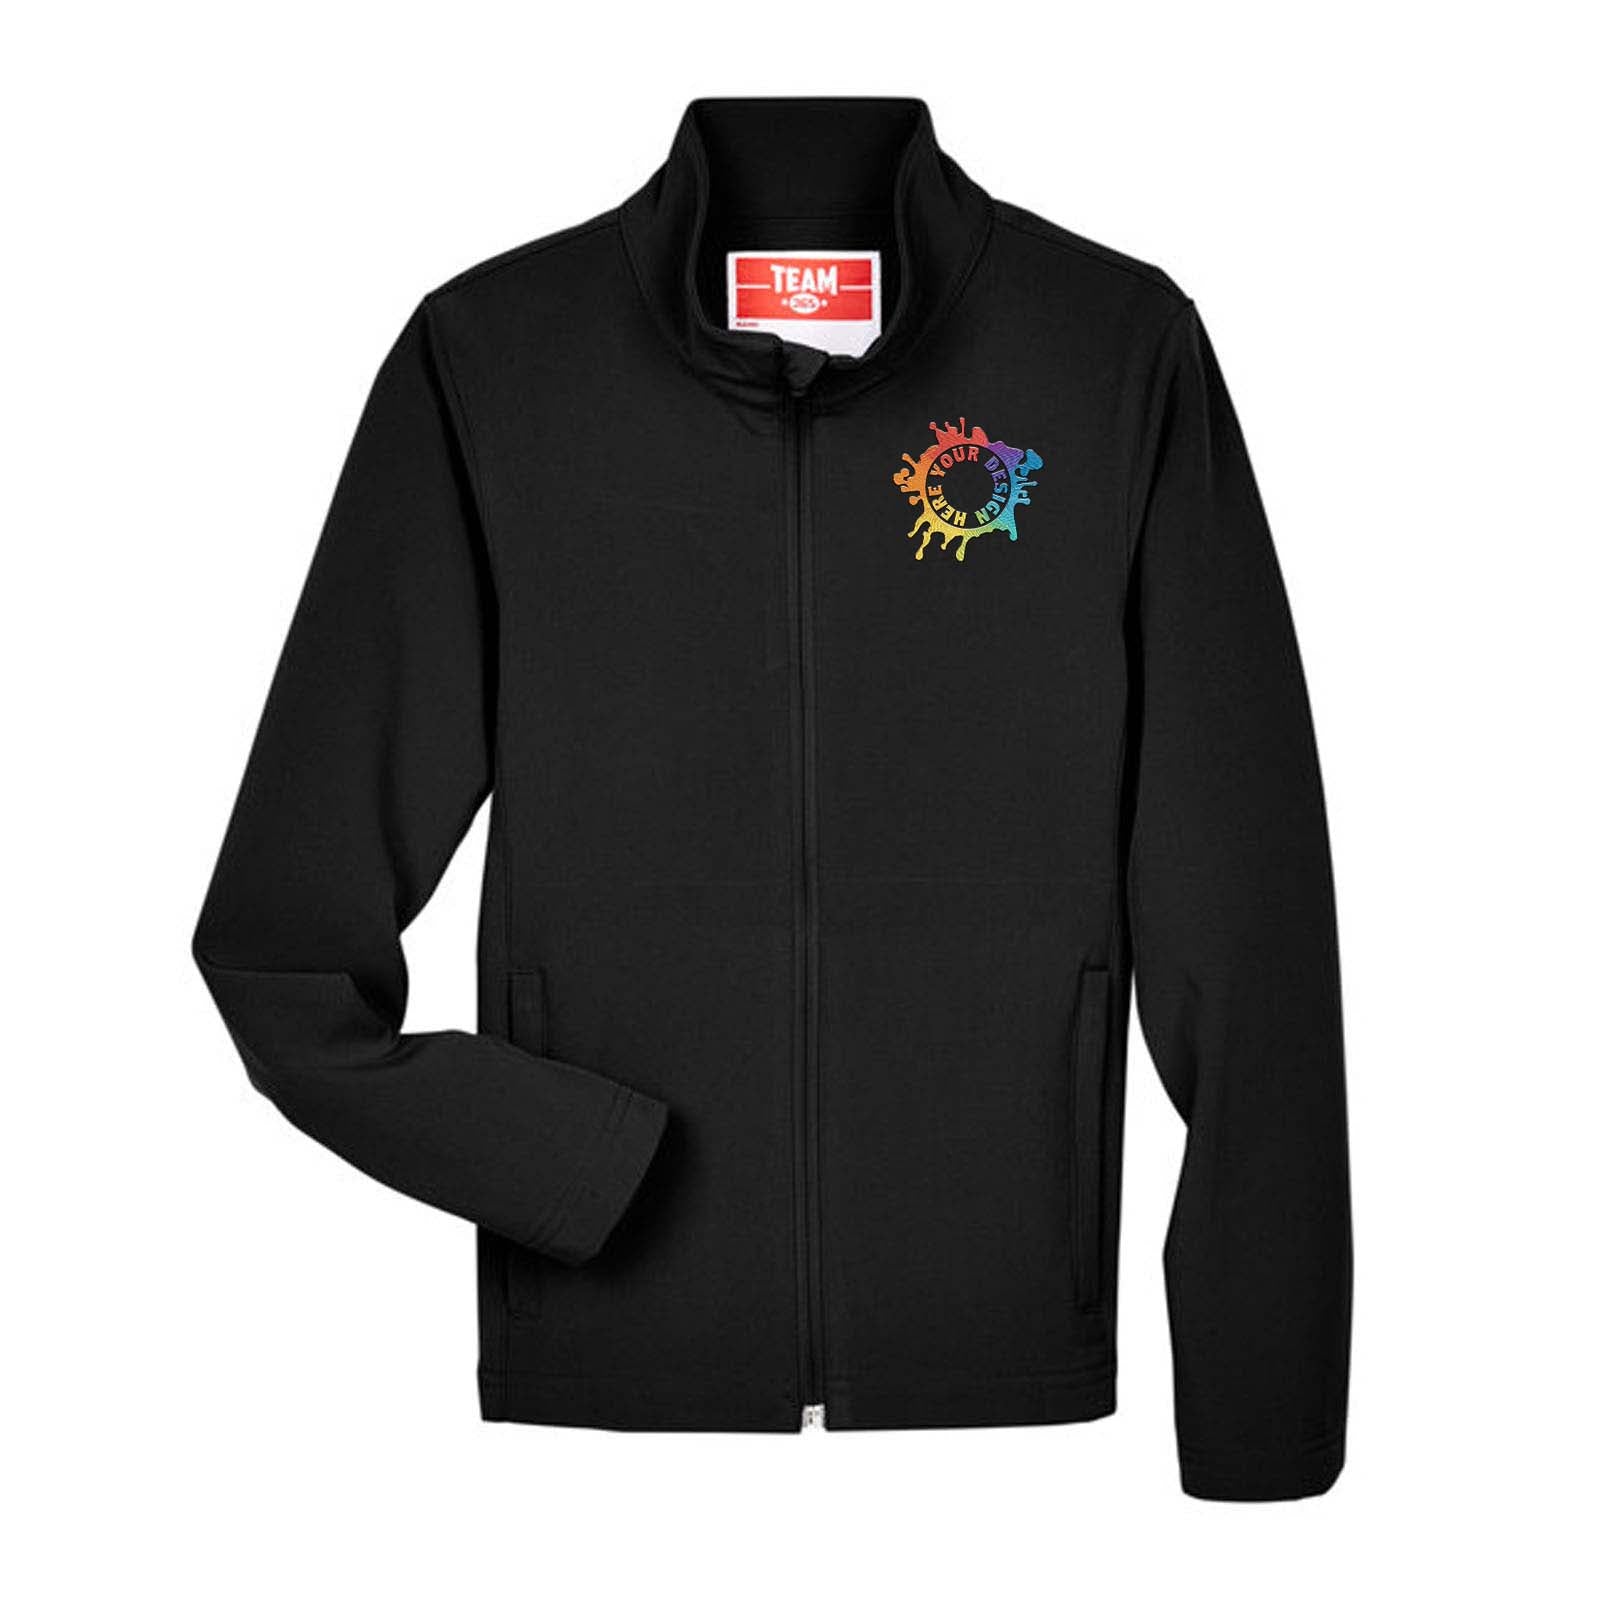 Team 365 Youth Leader Soft Shell Jacket Embroidery - Mato & Hash